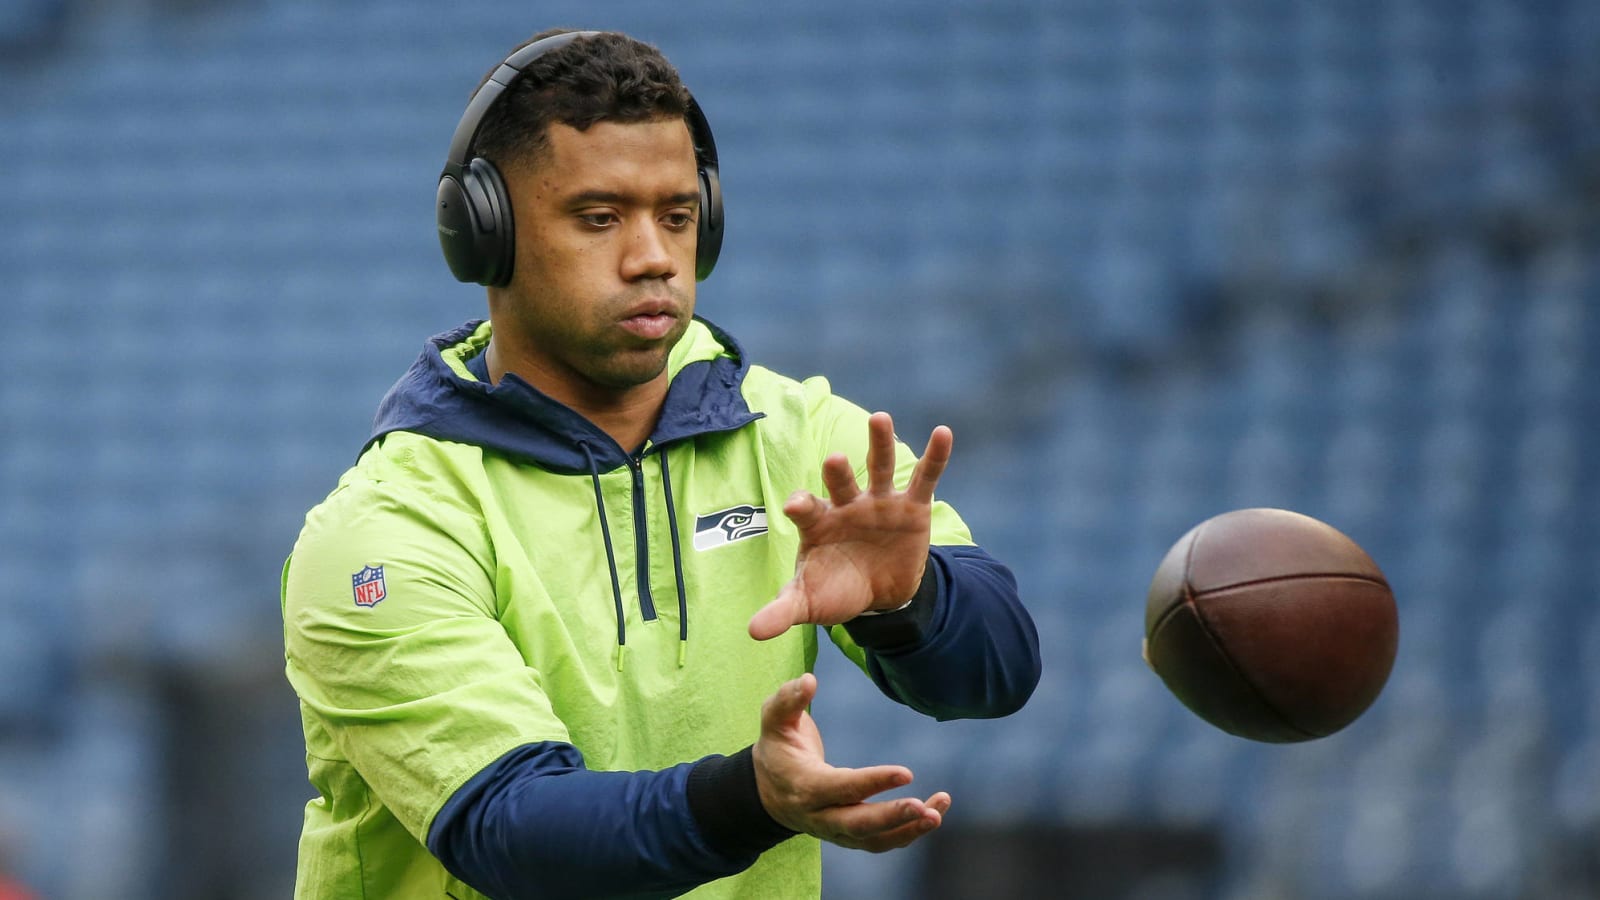 Seahawks reportedly planning to keep Wilson for 2022 season